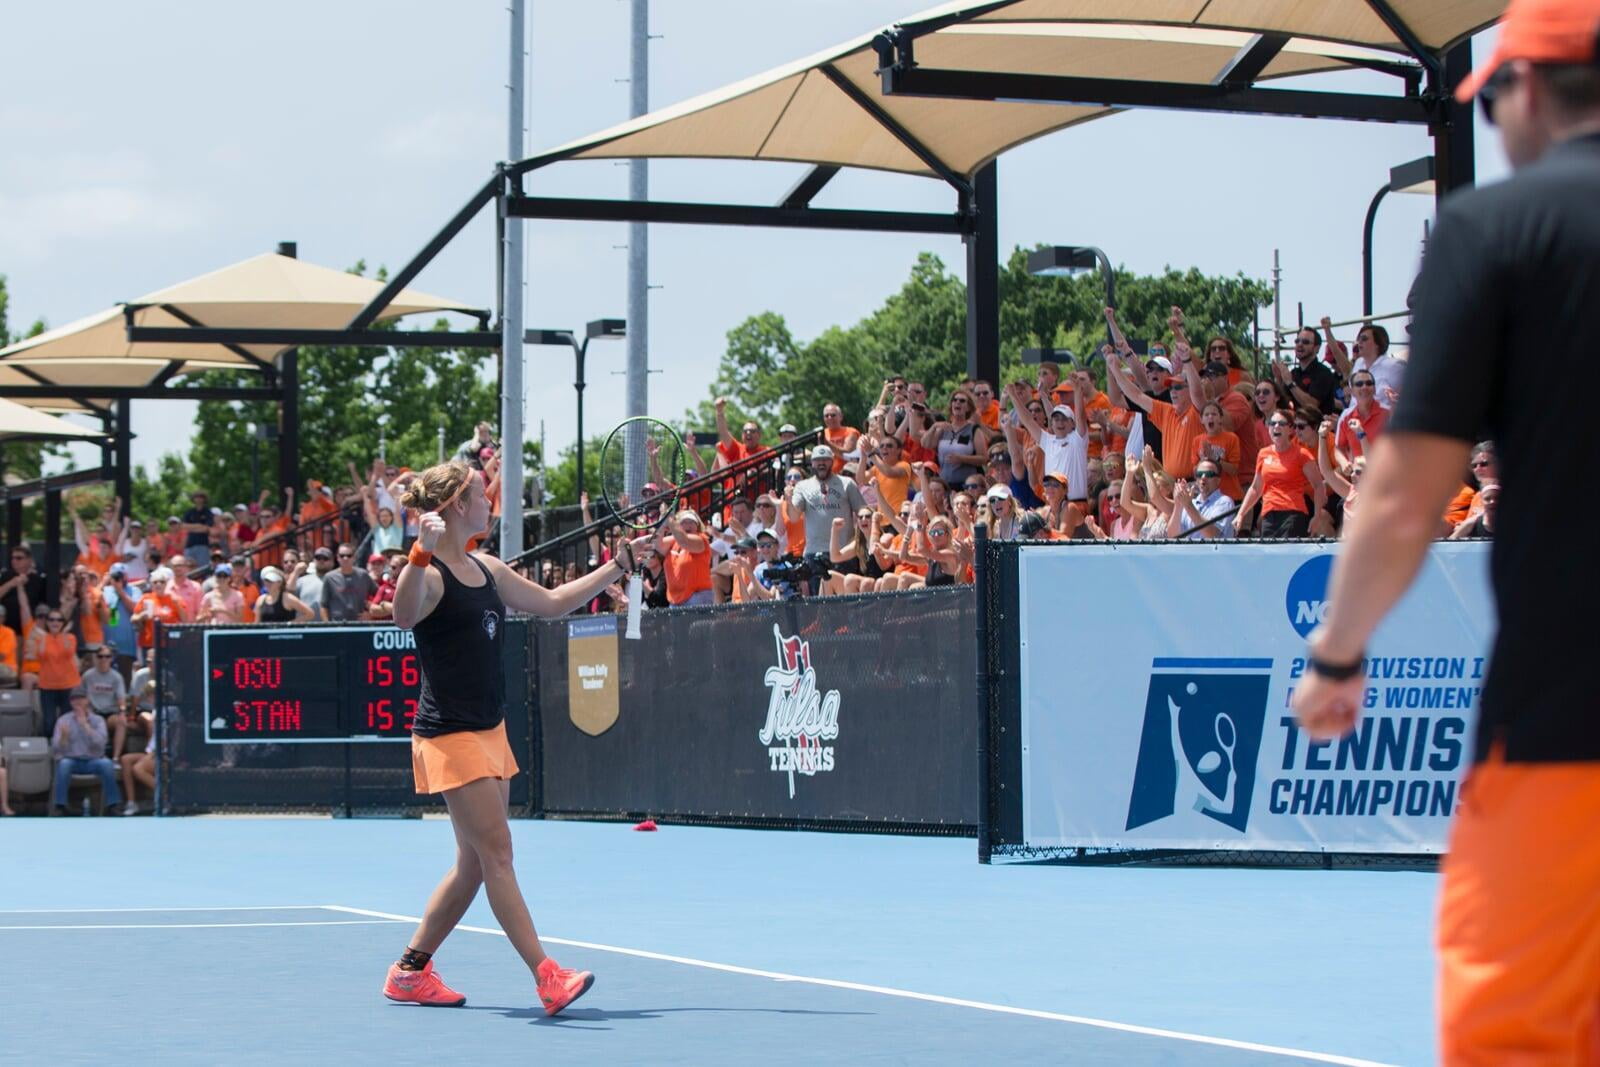 female college tennis player fisting pumping to the crowd on a tennis court